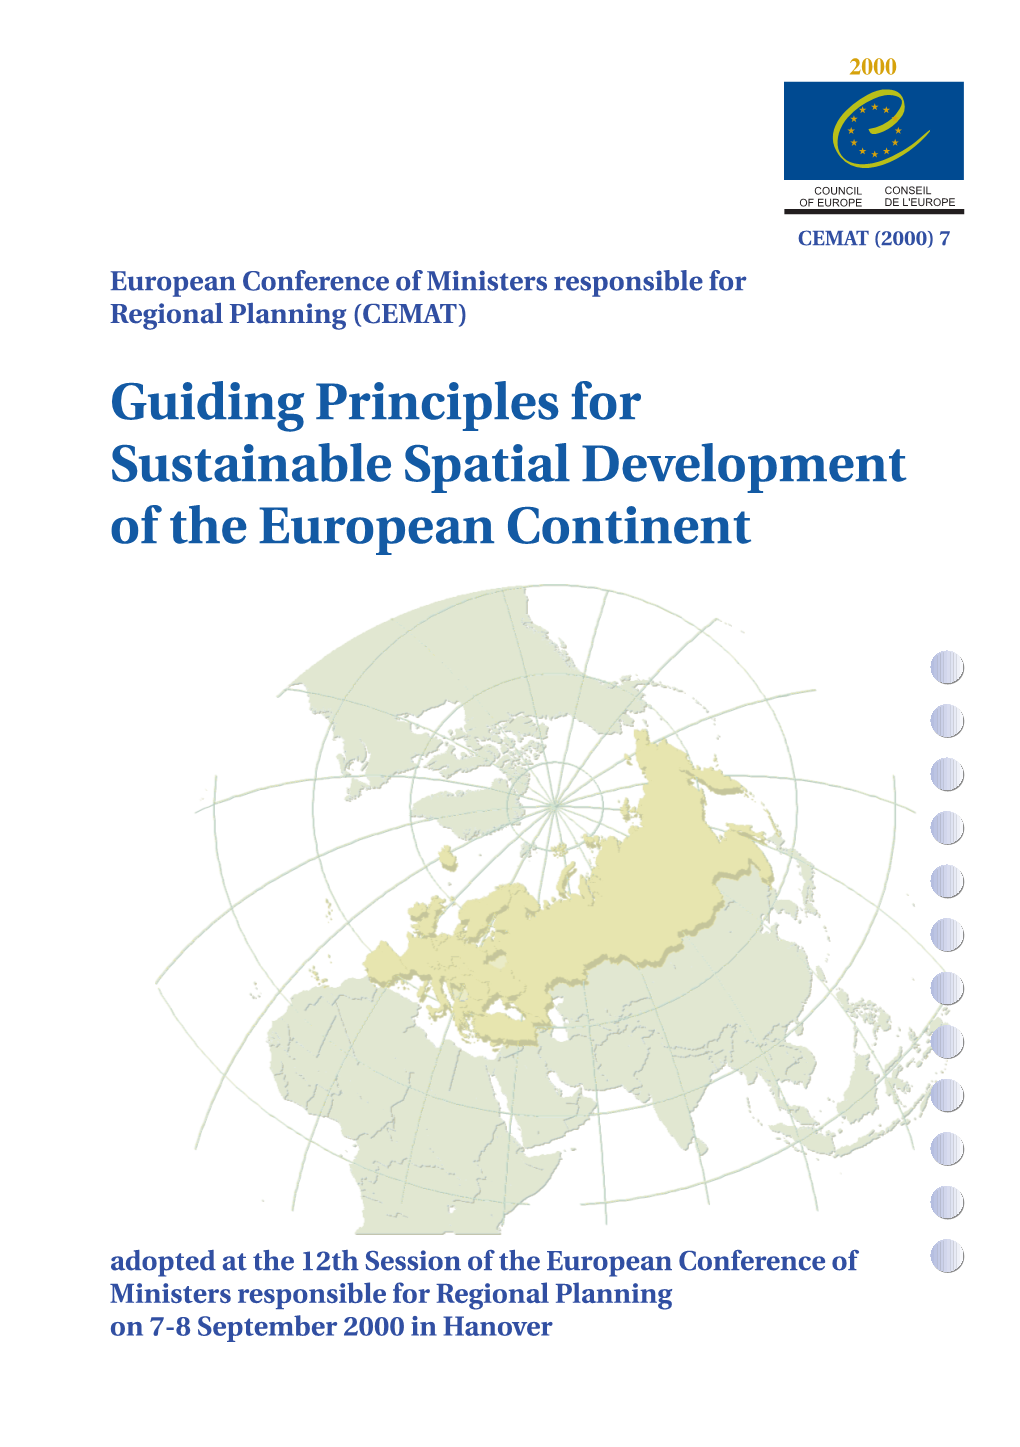 Guiding Principles for Sustainable Spatial Development of the European Continent